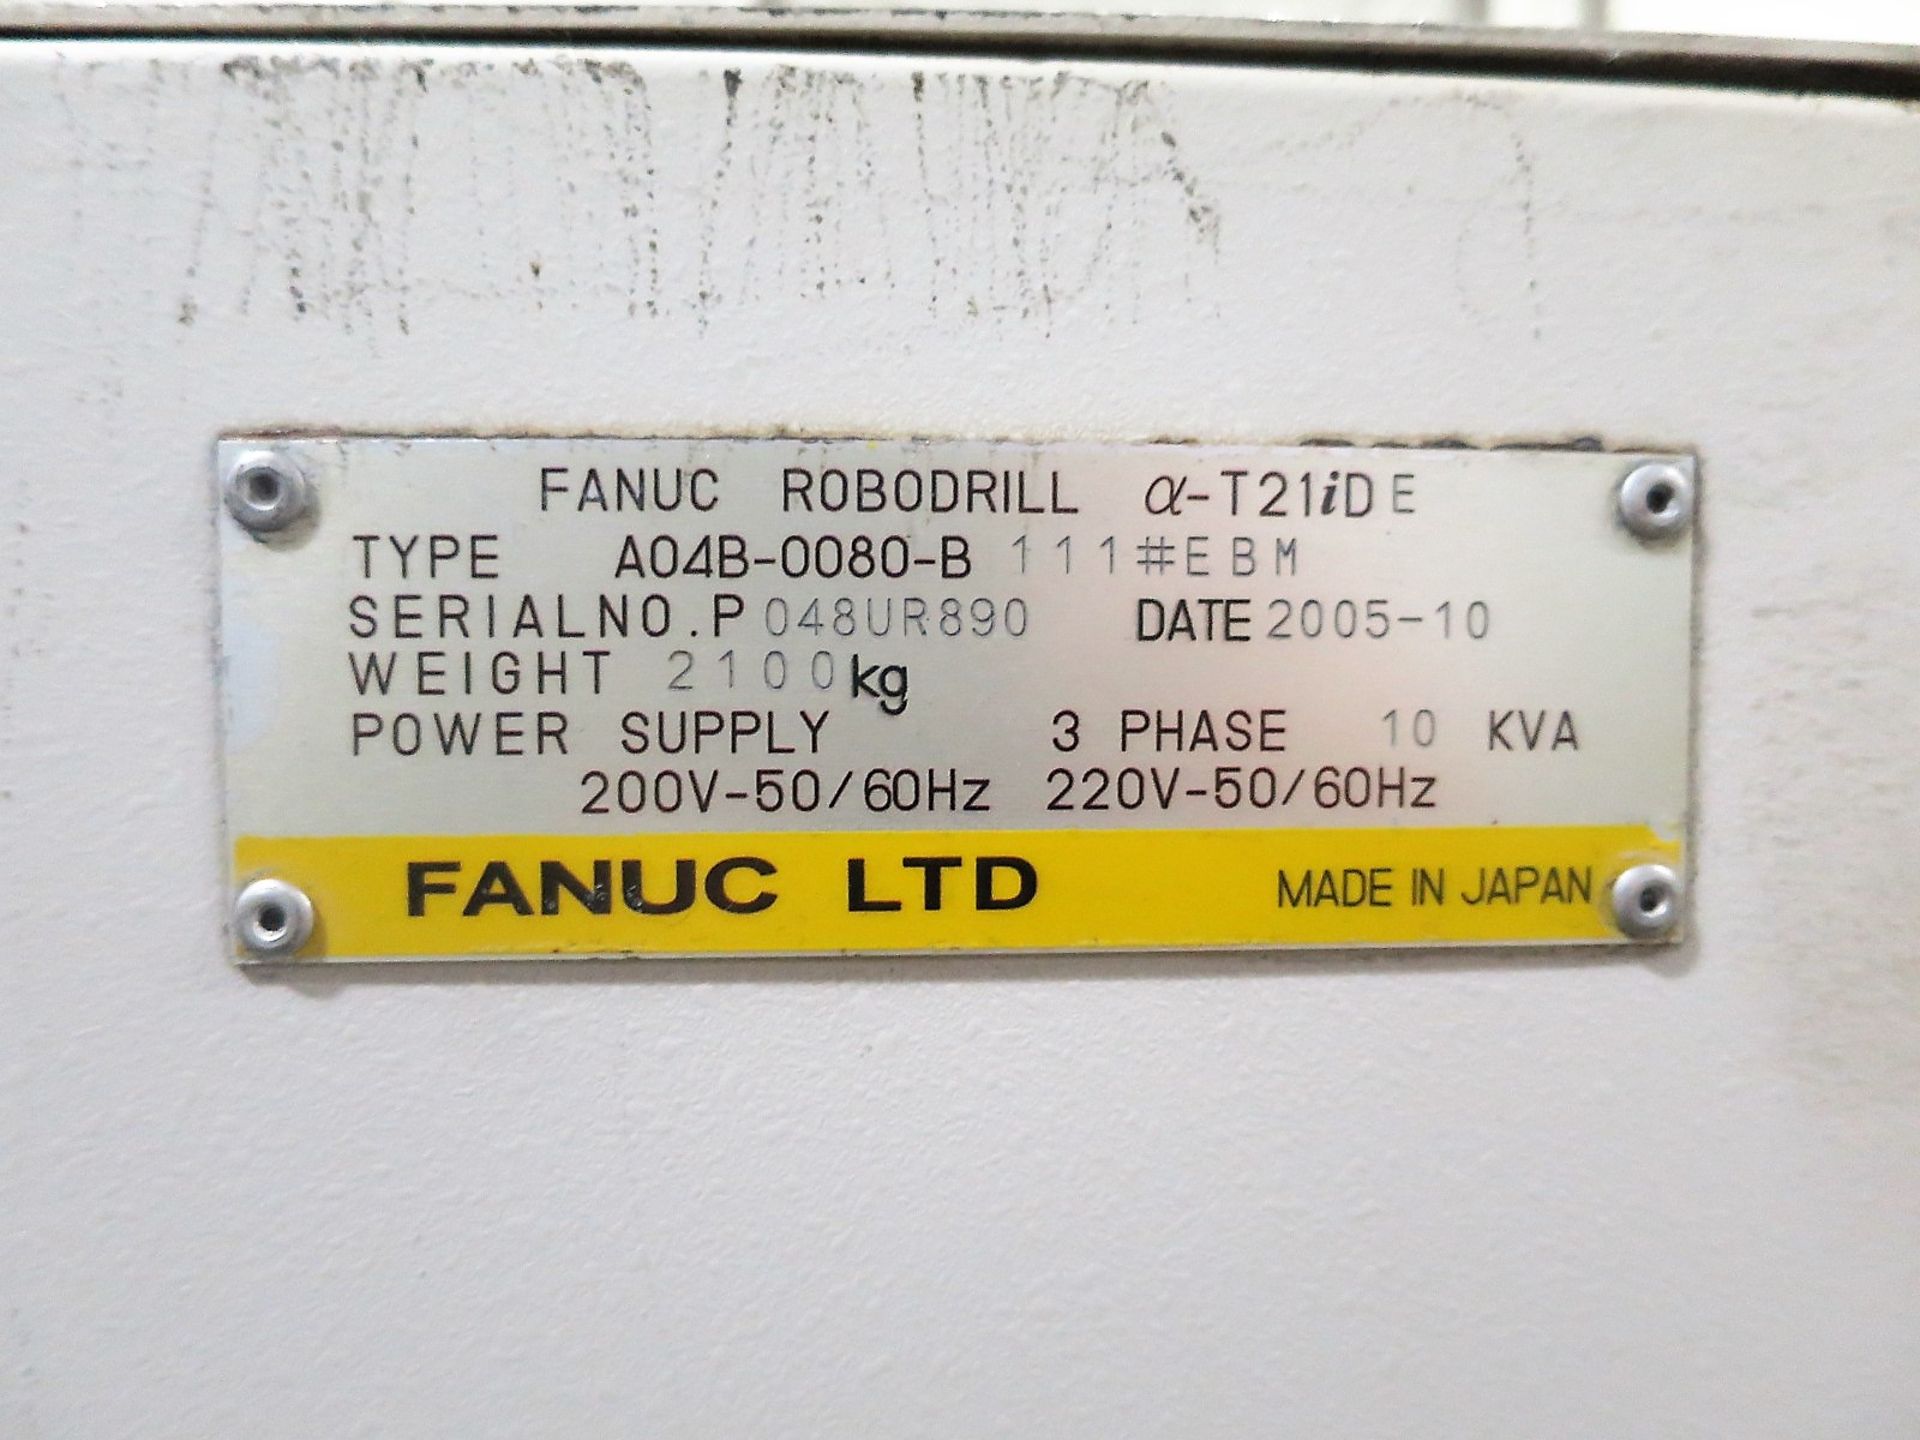 Fanuc Robodrill Alpha T21iDE 3-Axis Vertical High Speed Drill Tap Machining Center, S/N P048UR890 - Image 7 of 9